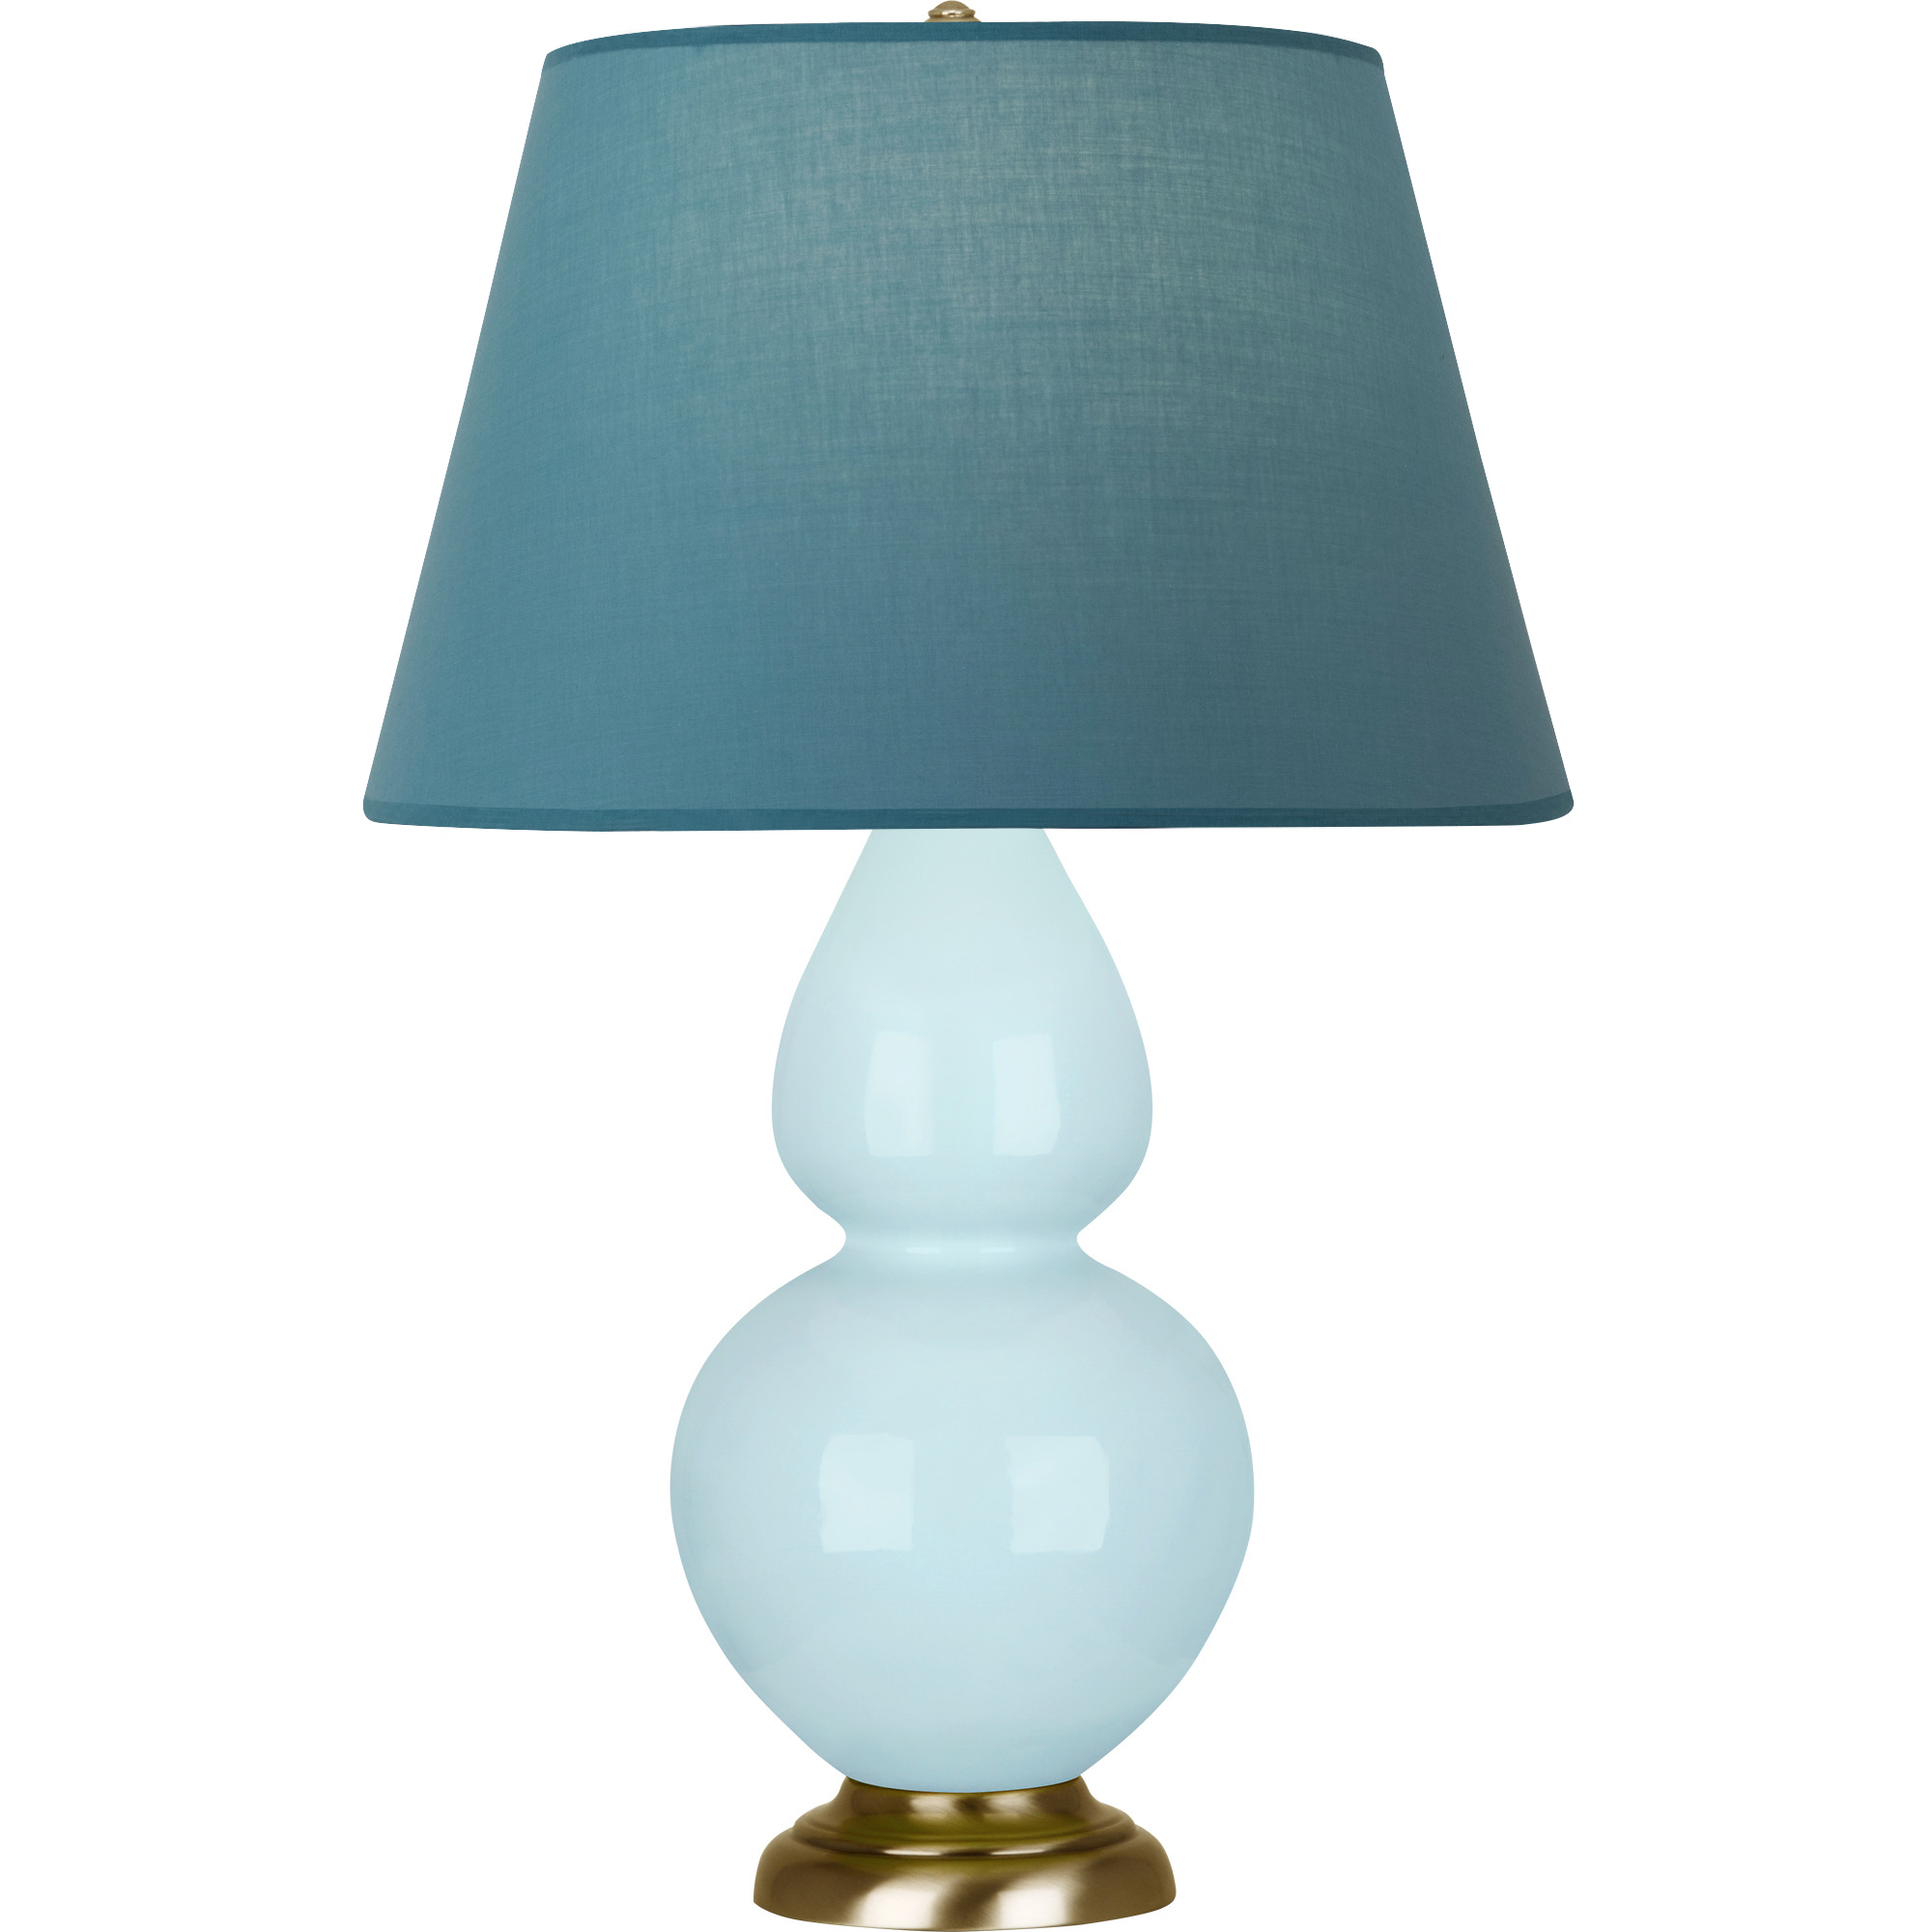 Double Gourd Table Lamp Style #1666B